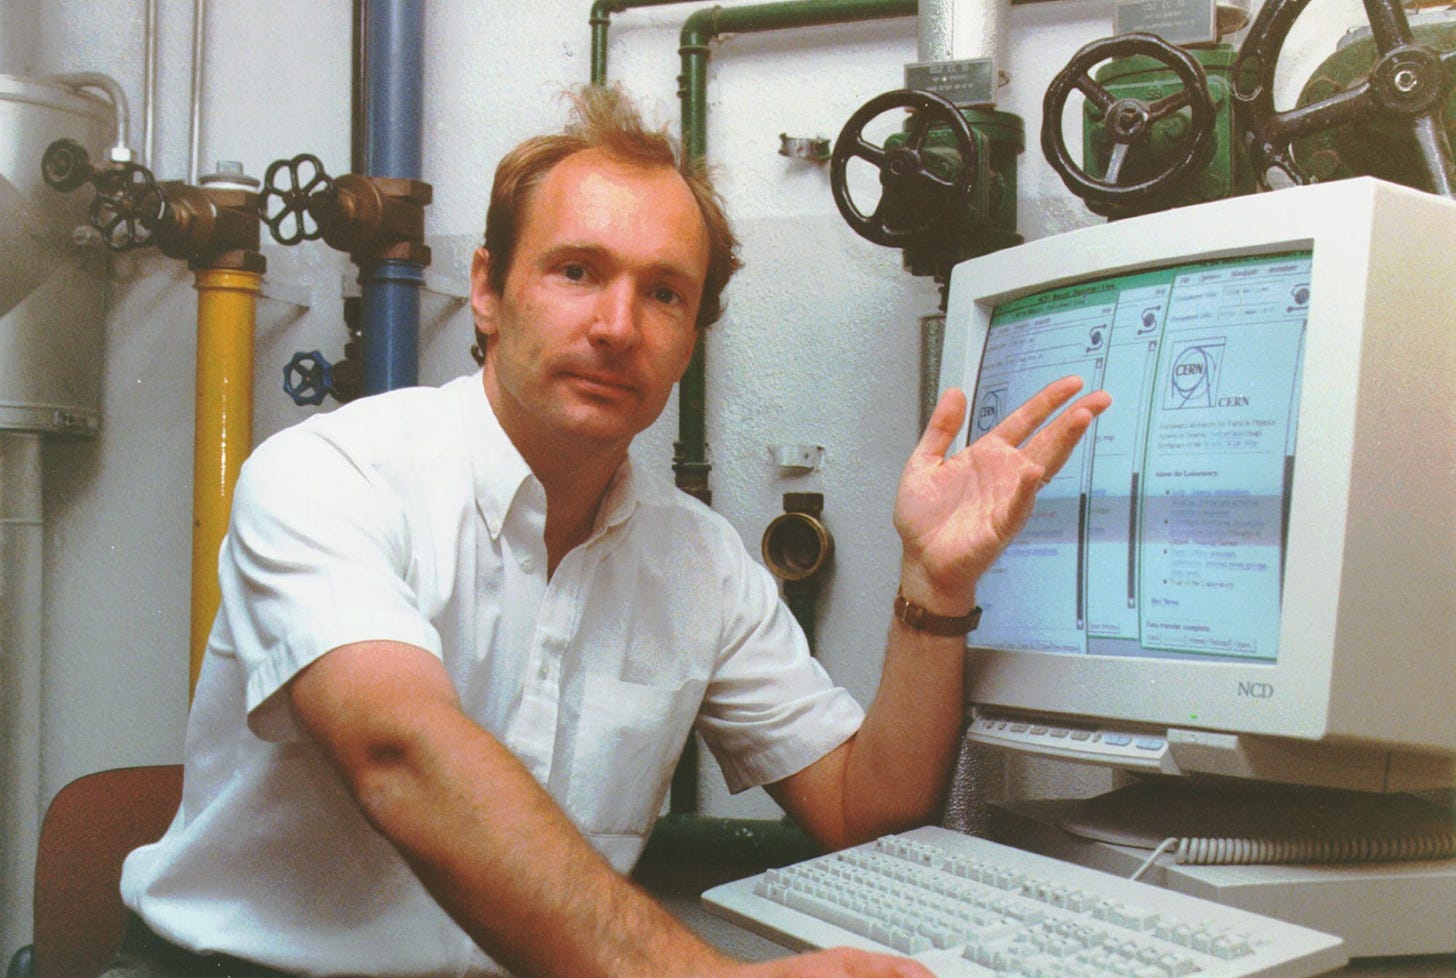 The World Wide Web's inventor sold its original code for $5.4 million | CNN